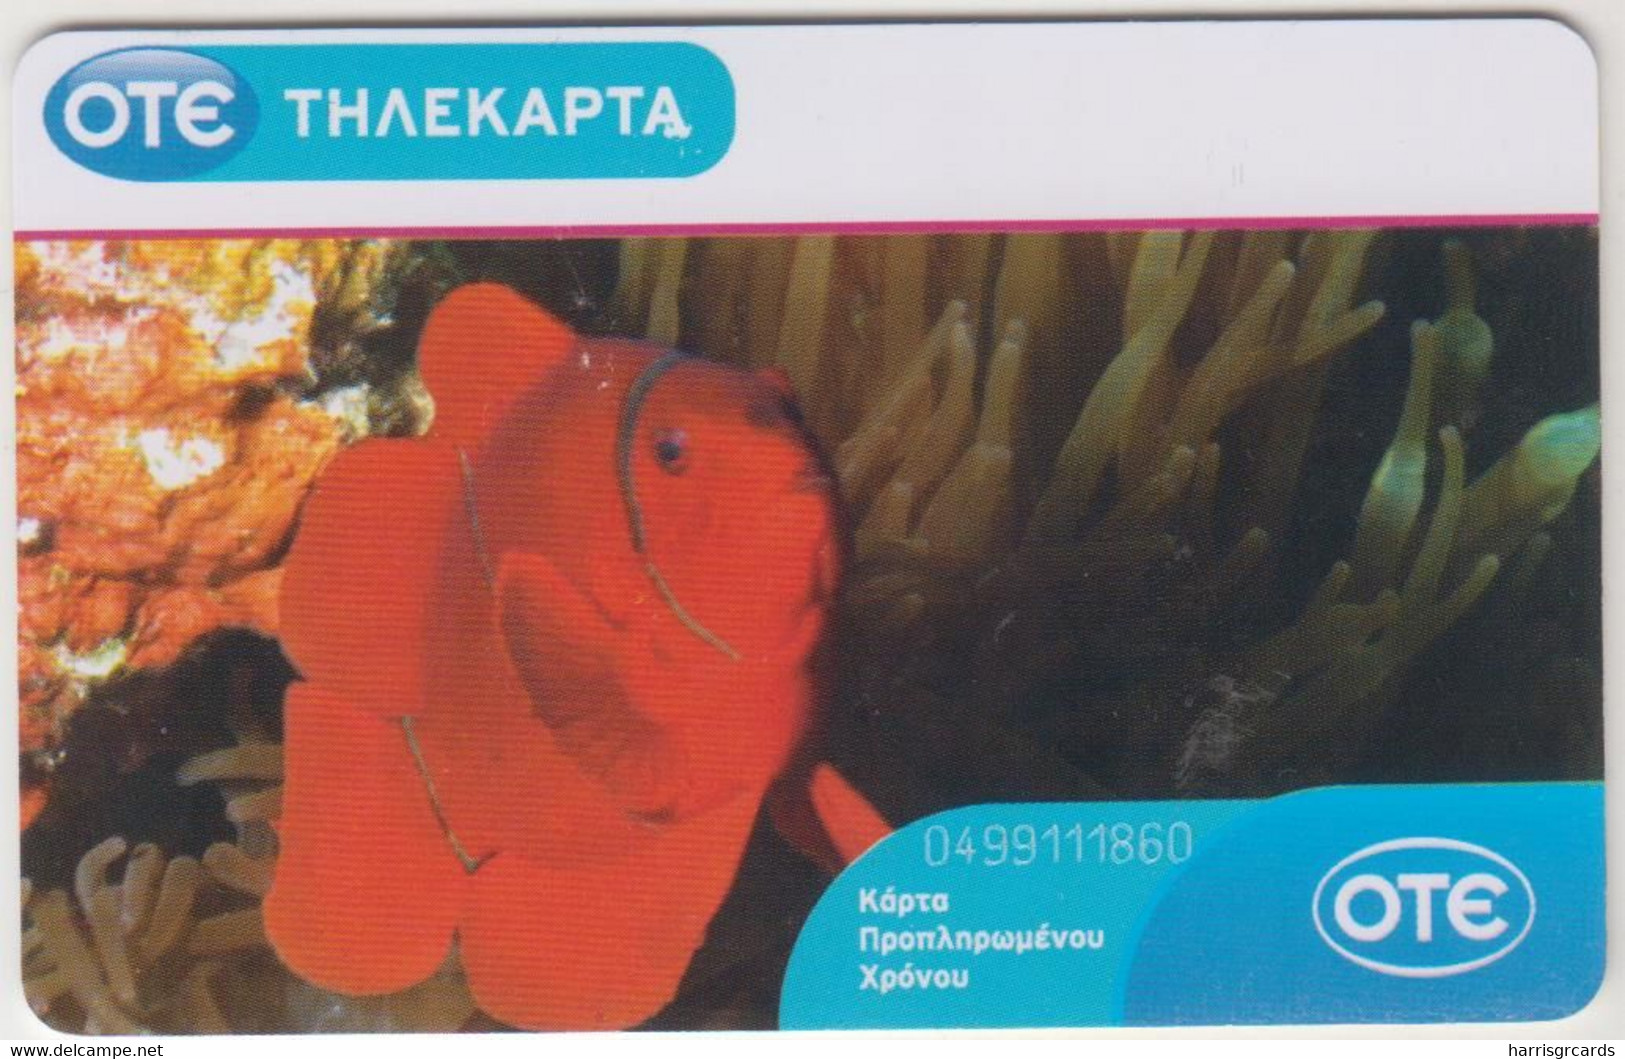 GREECE - Seabed's Life 2 (Fish), X2214, Tirage 70.000, 02/10, Used - Peces